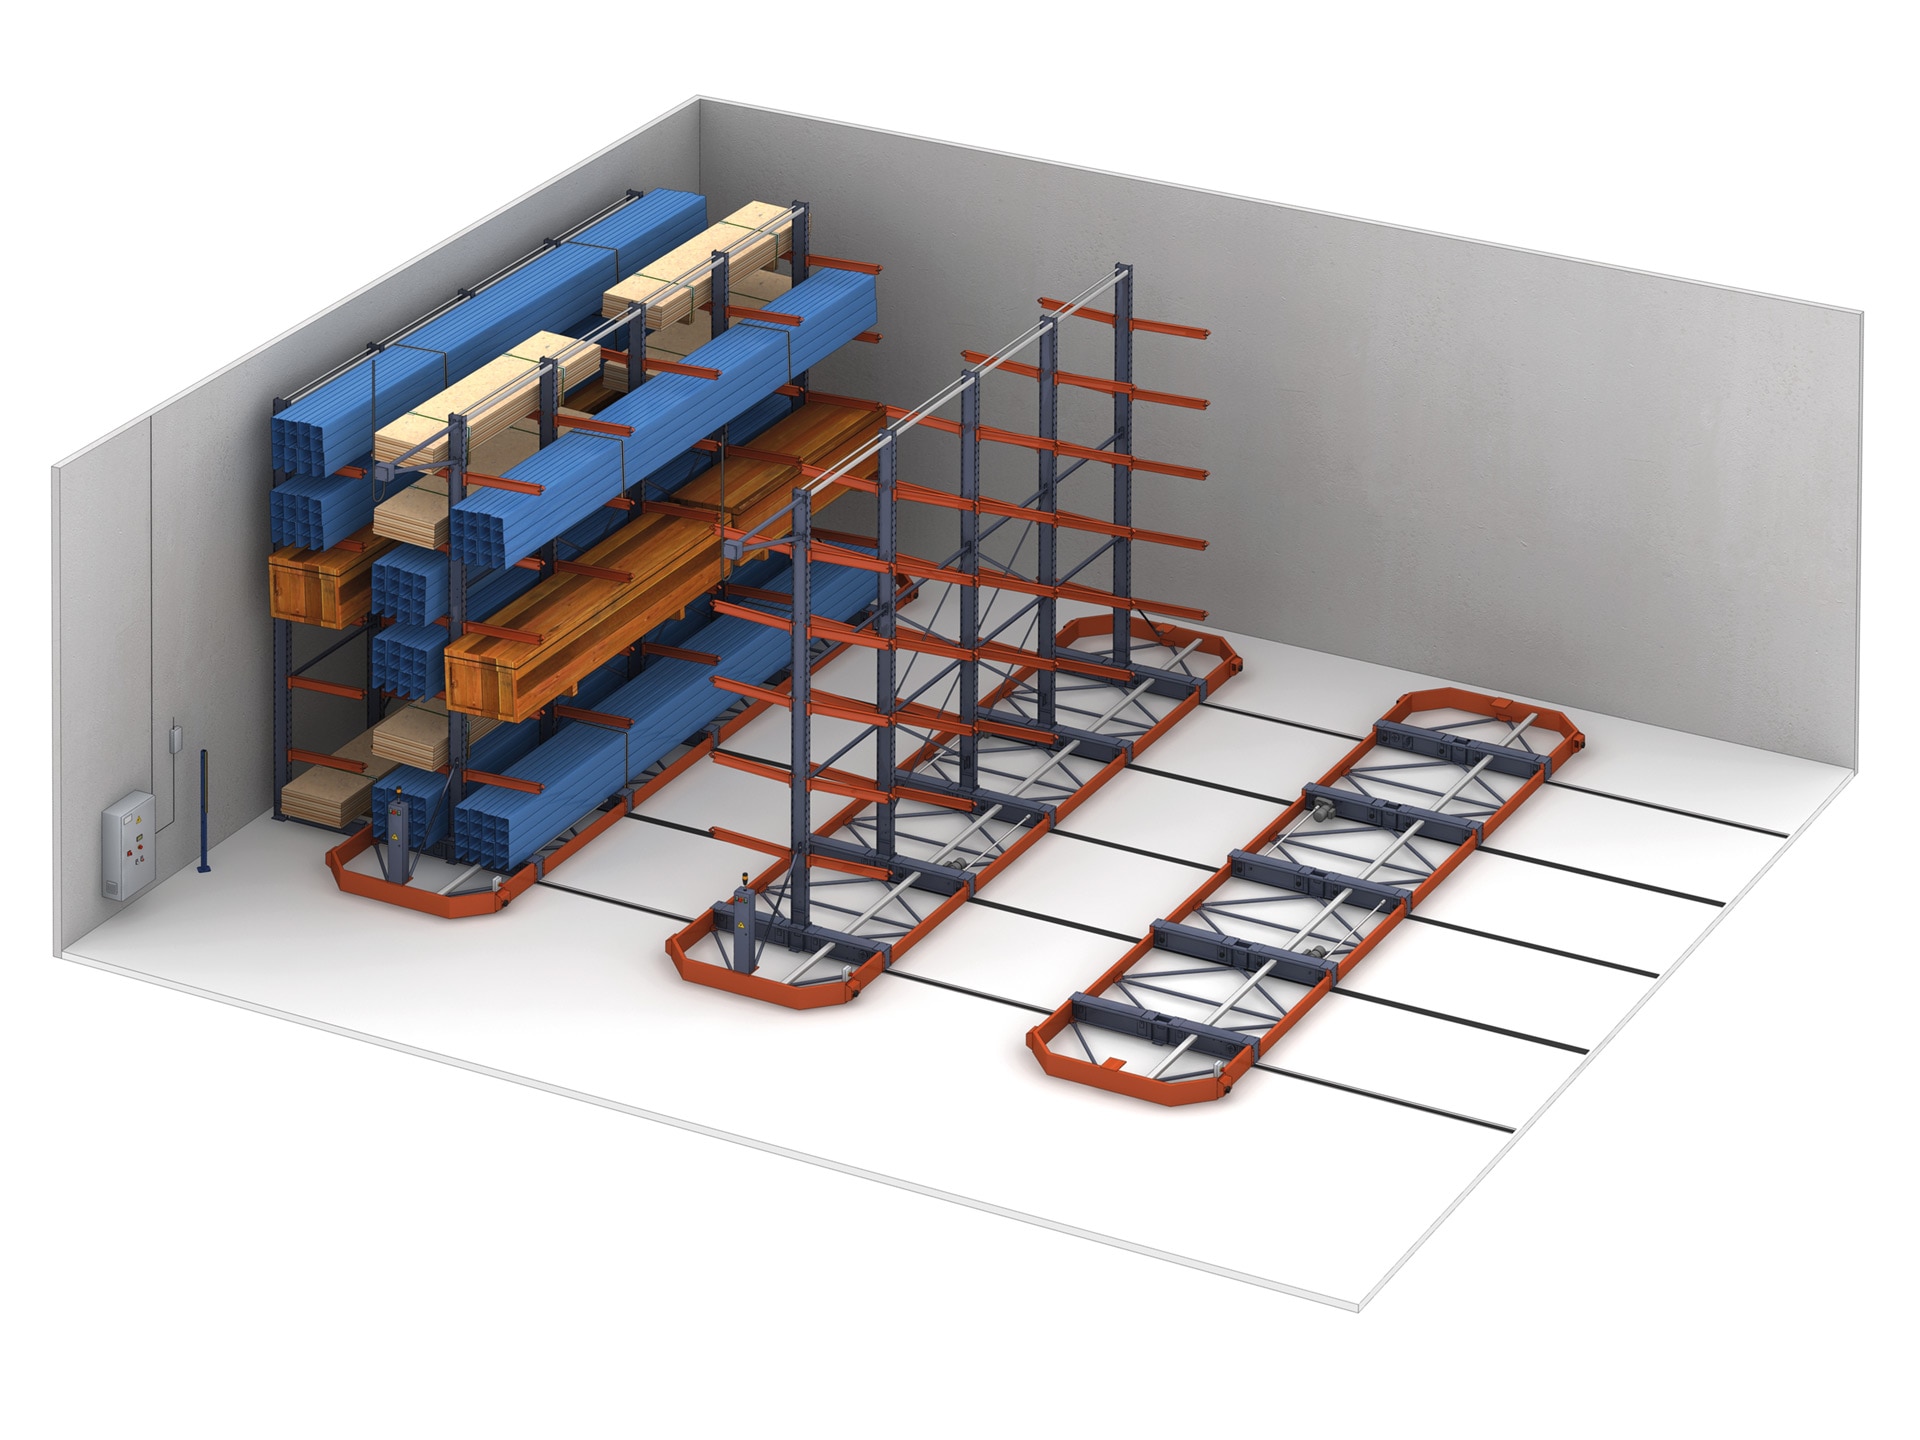 Cantilever racking can be installed on mobile bases to store large and bulky loads